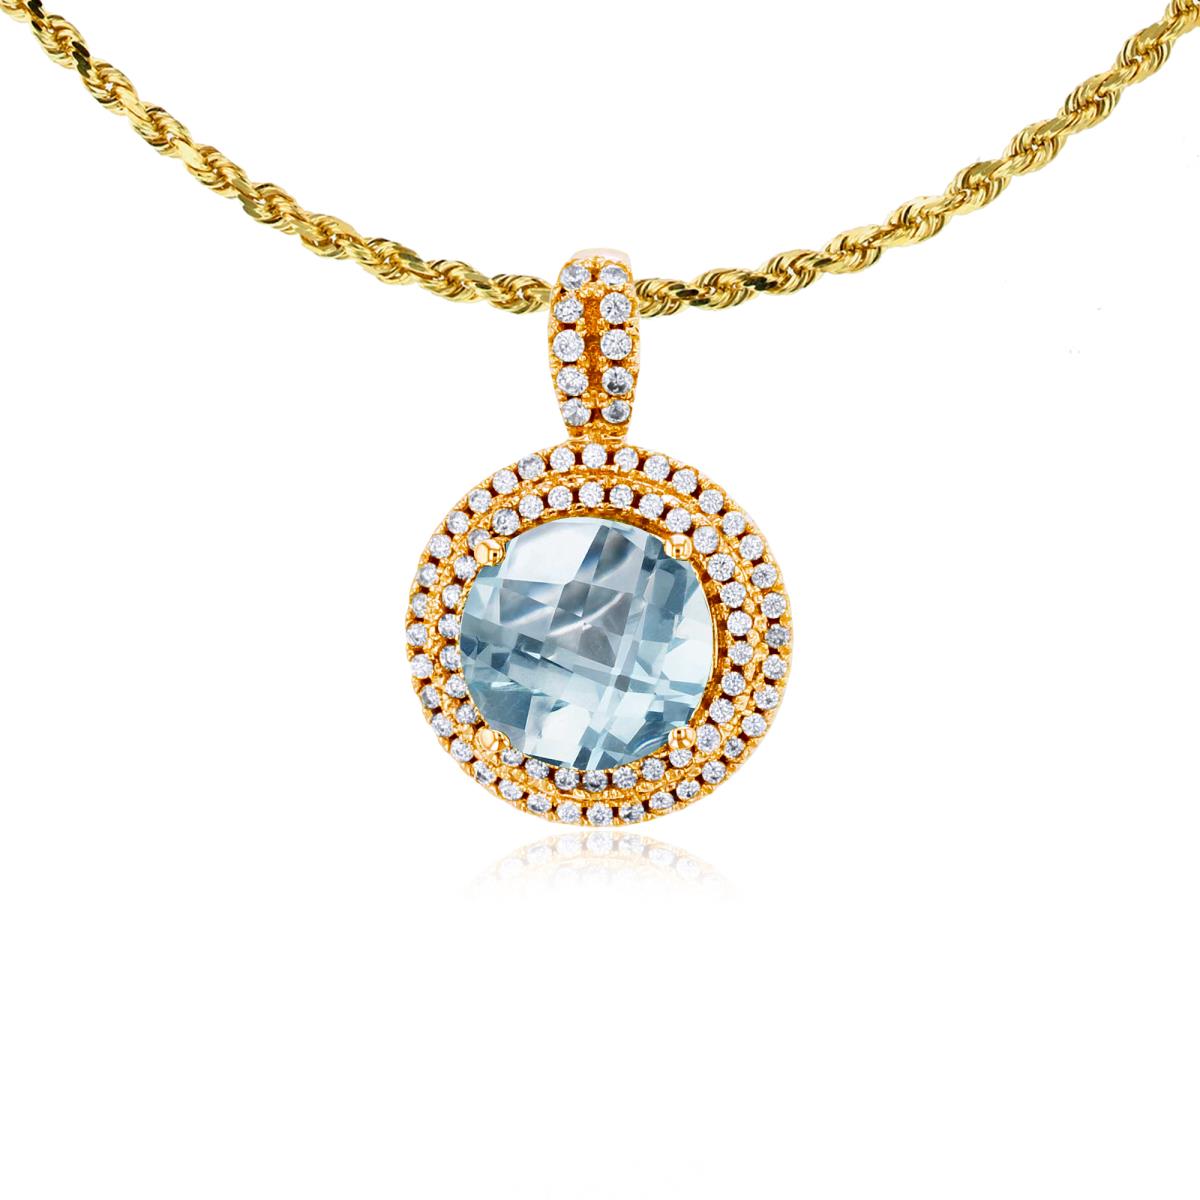 14K Yellow Gold 7mm Round Aquamarine & 0.25 CTTW Diamonds Double Halo 18" Rope Chain Necklace